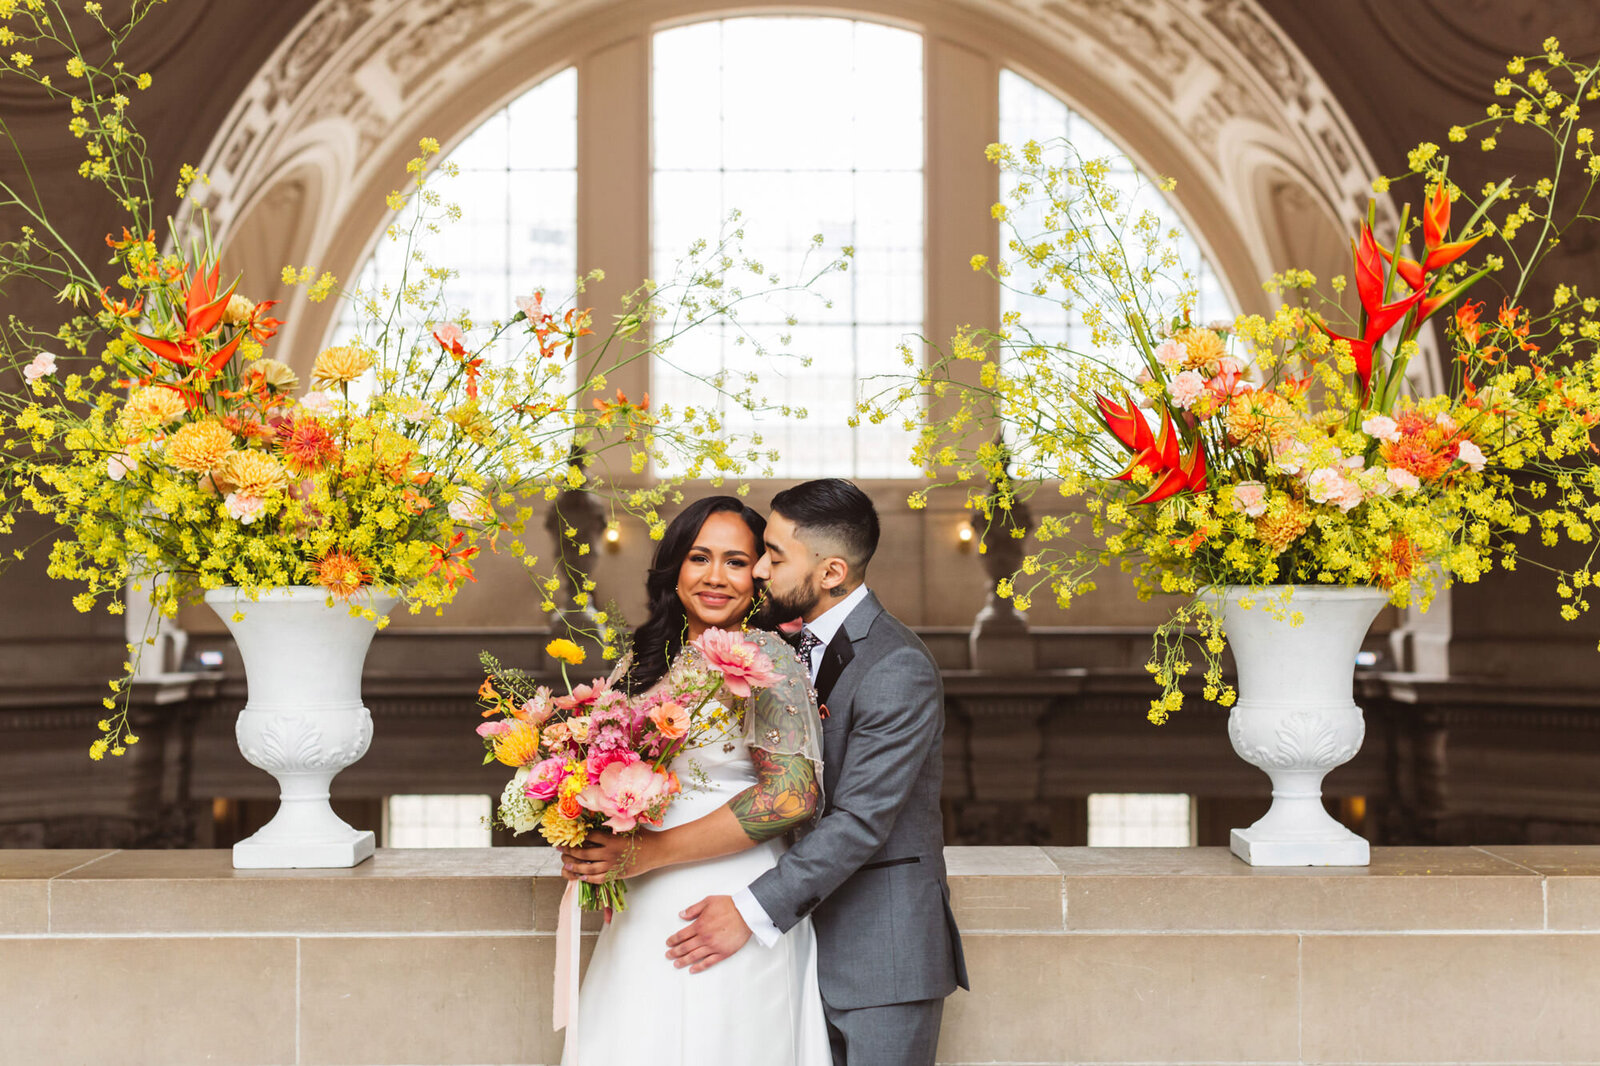 San Francisco City Hall private ceremony with flowers